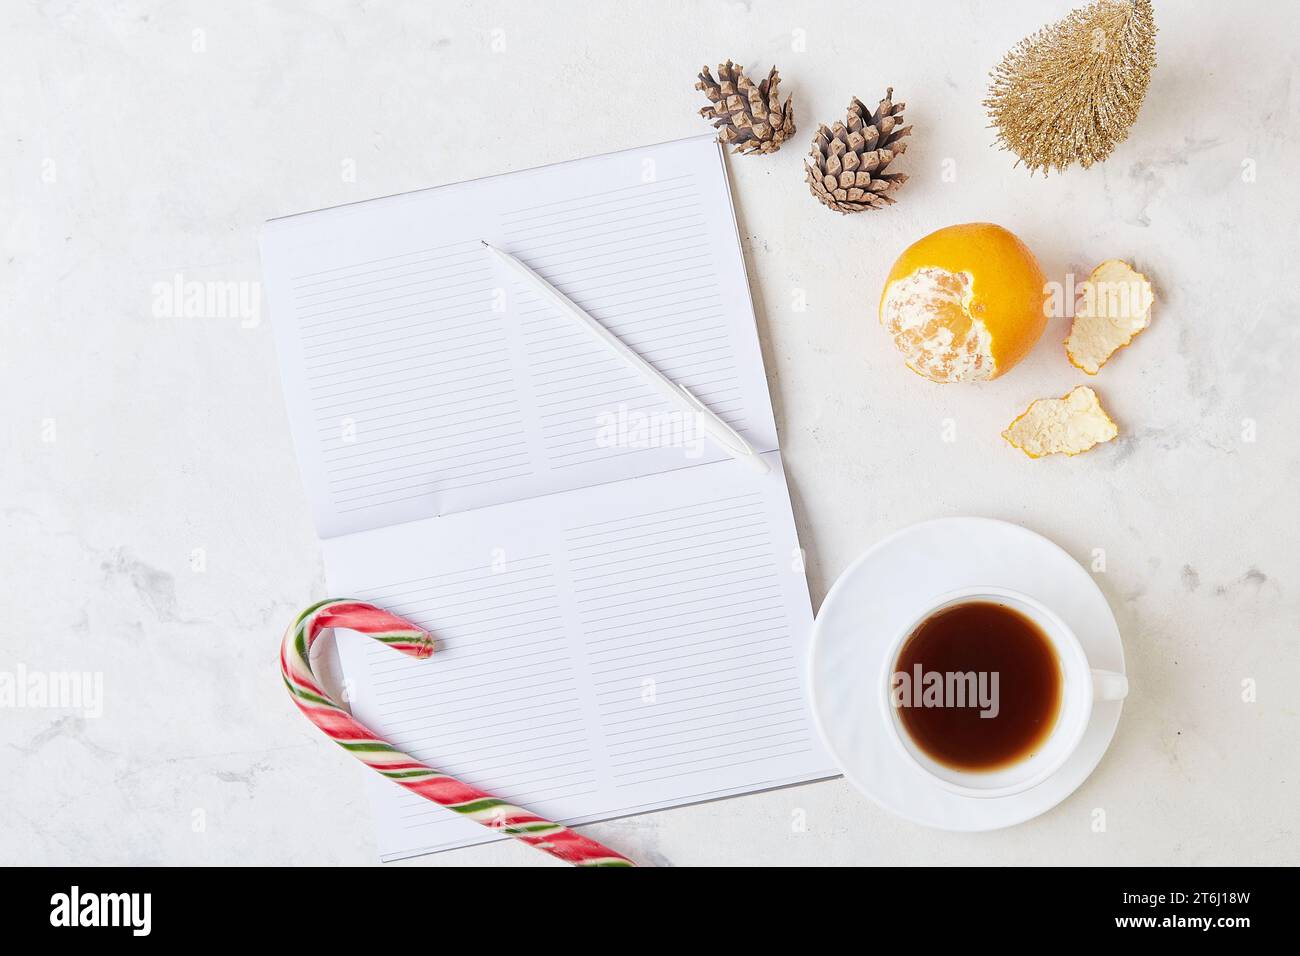 template scene with coffee cup, caramel stick and New Year's resolutions, setting the tone for fresh beginnings. Stock Photo